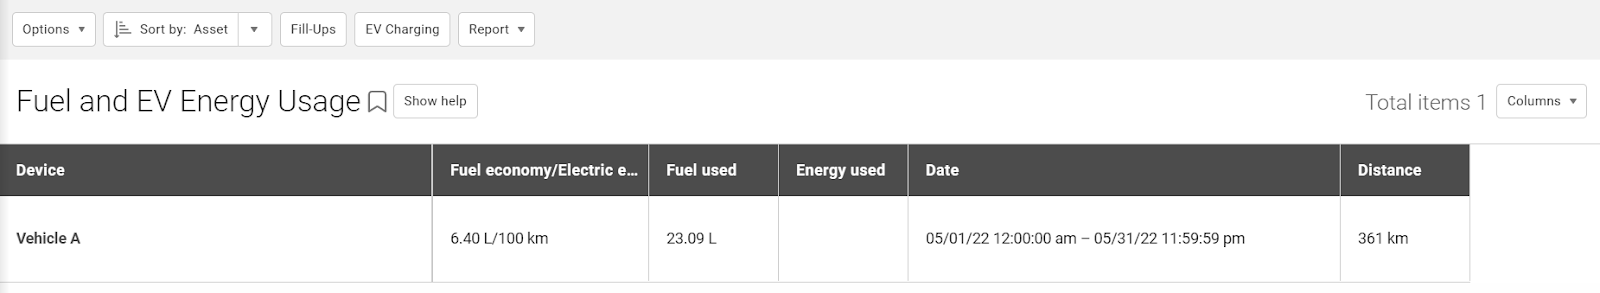 Example of fuel transactions from a device.